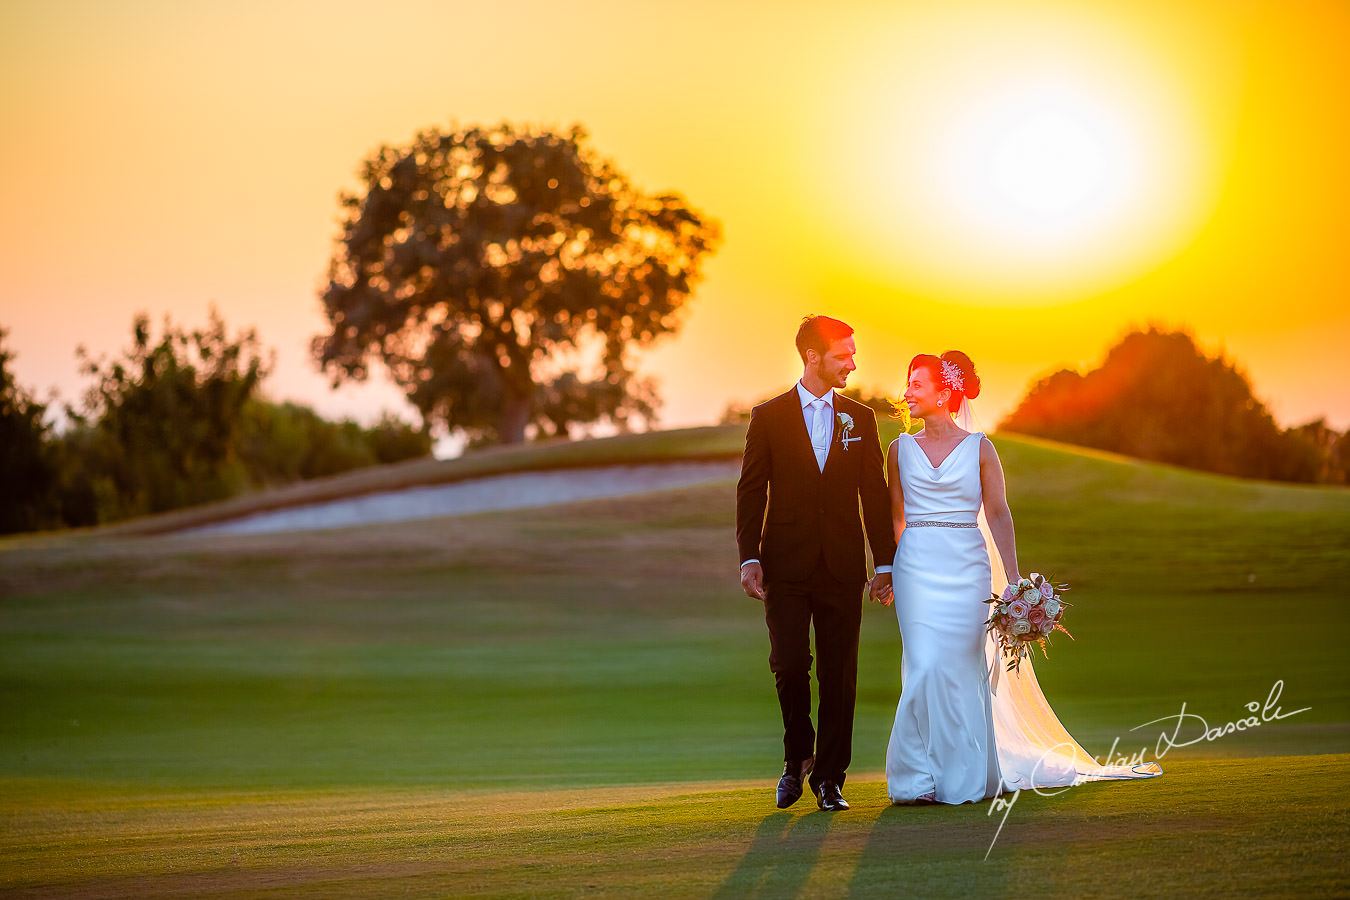 Sunset photo shoot moments captured by Cristian Dascalu during an elegant Aphrodite Hills Wedding in Cyprus.